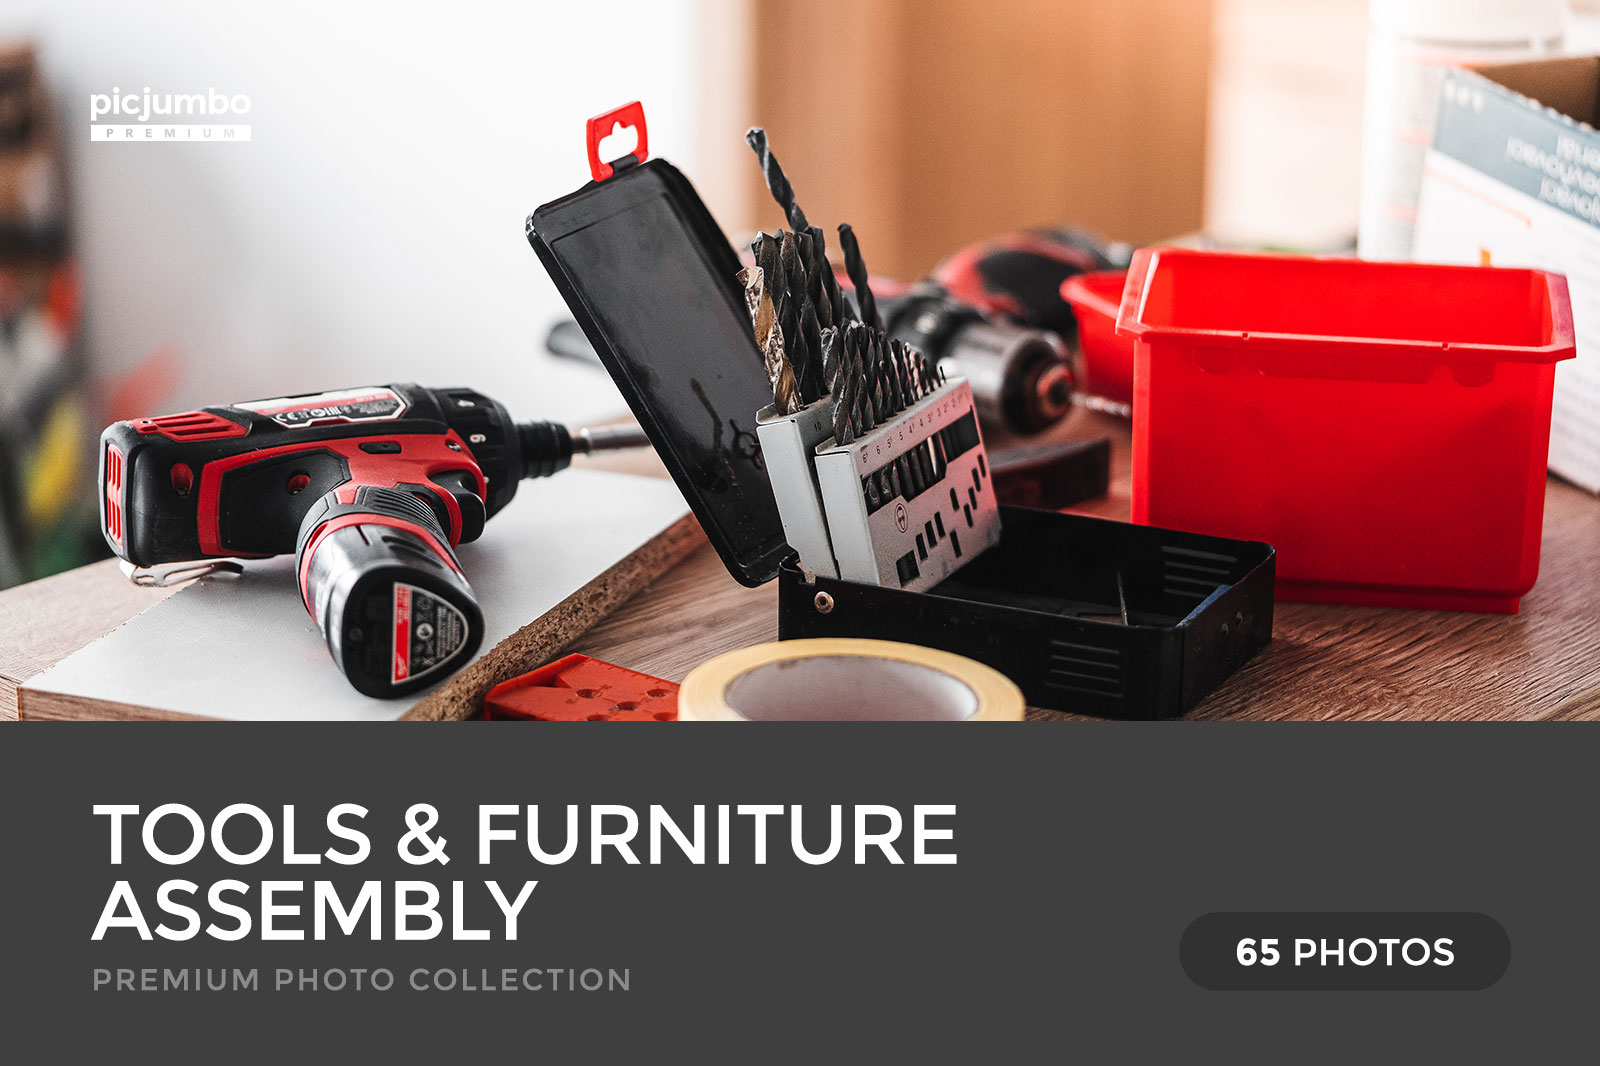 Download hi-res stock photos from our Tools & Furniture Assembly PREMIUM Collection!